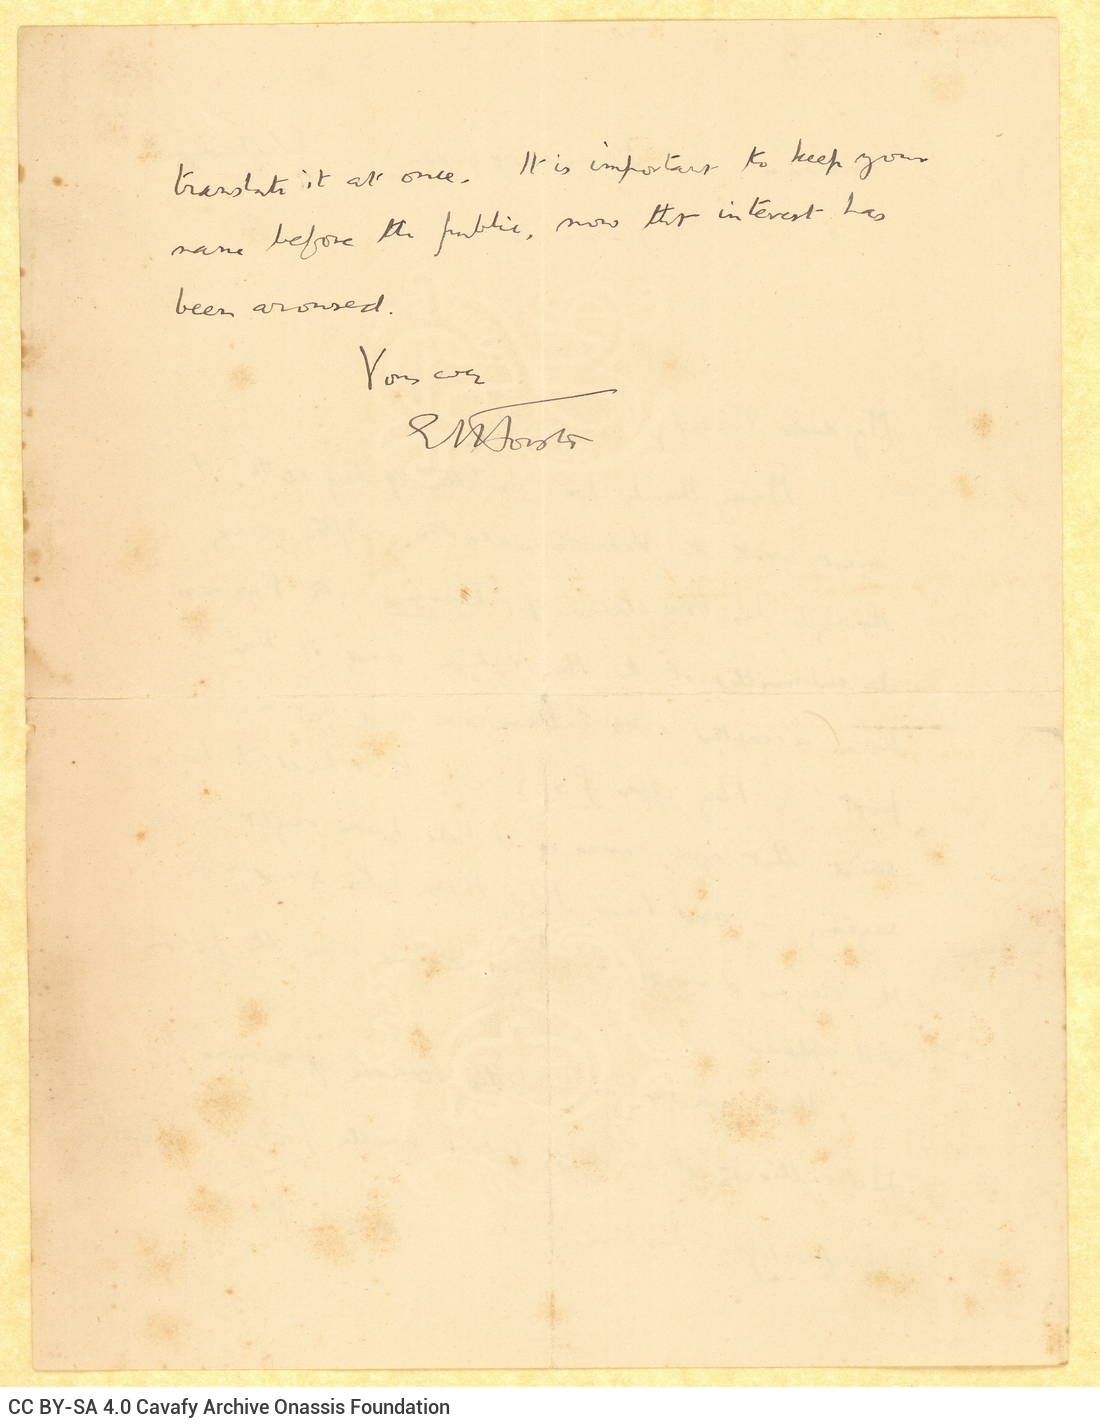 Handwritten letter by E. M. Forster on both sides of a sheet. He informs Cavafy that the poem "Darius" has been accepted for 